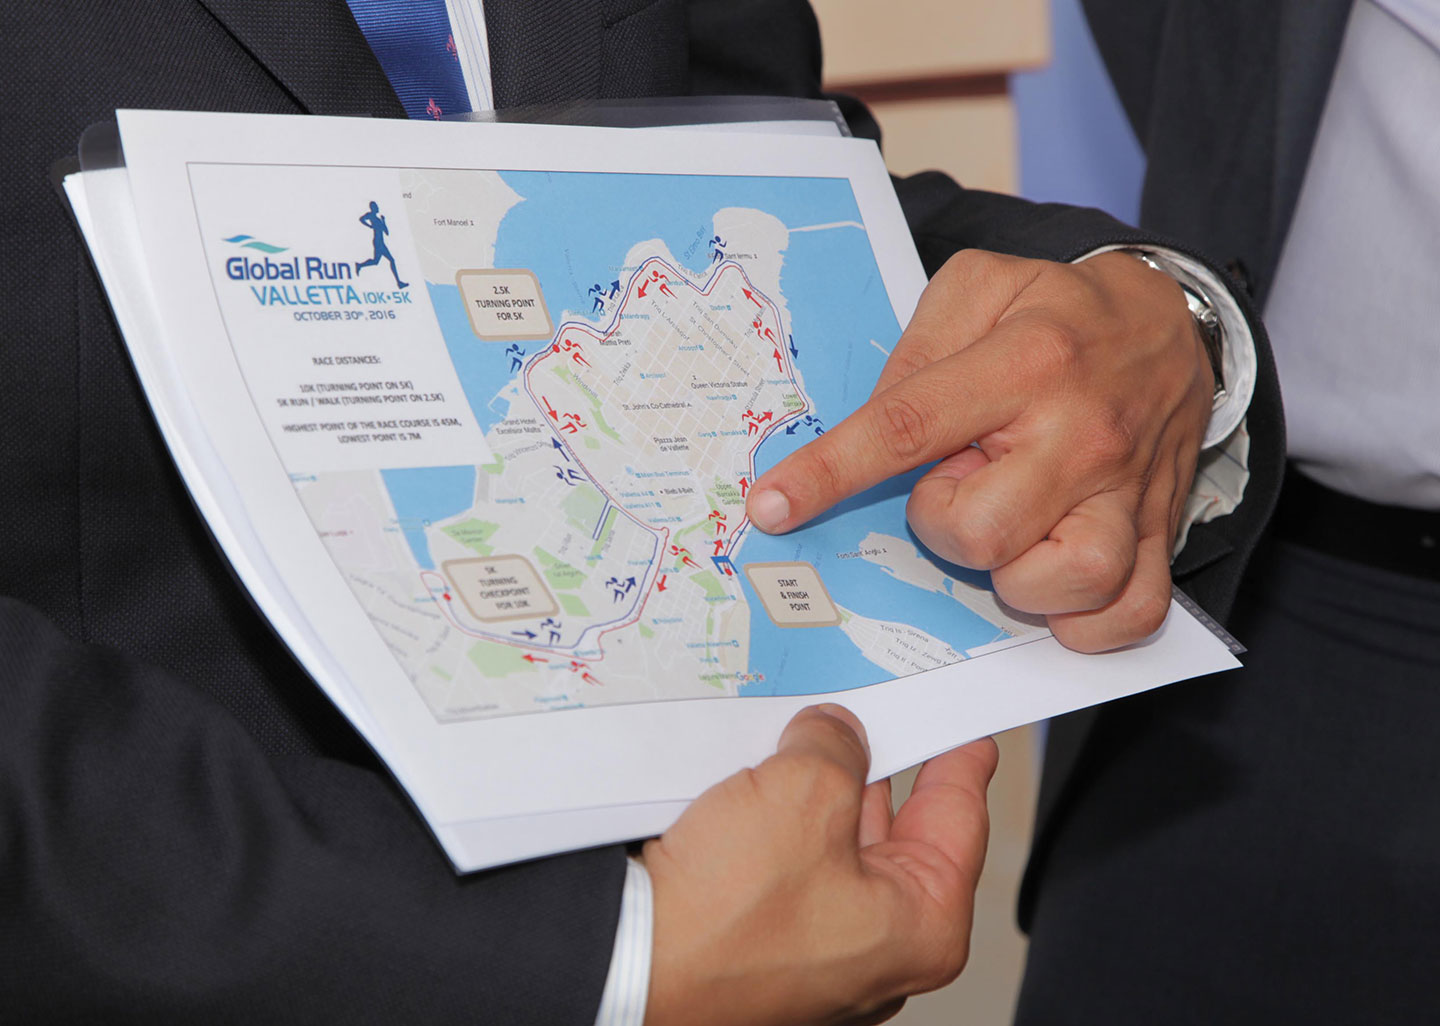 Global Run Valletta route unveiled for runners and walkers